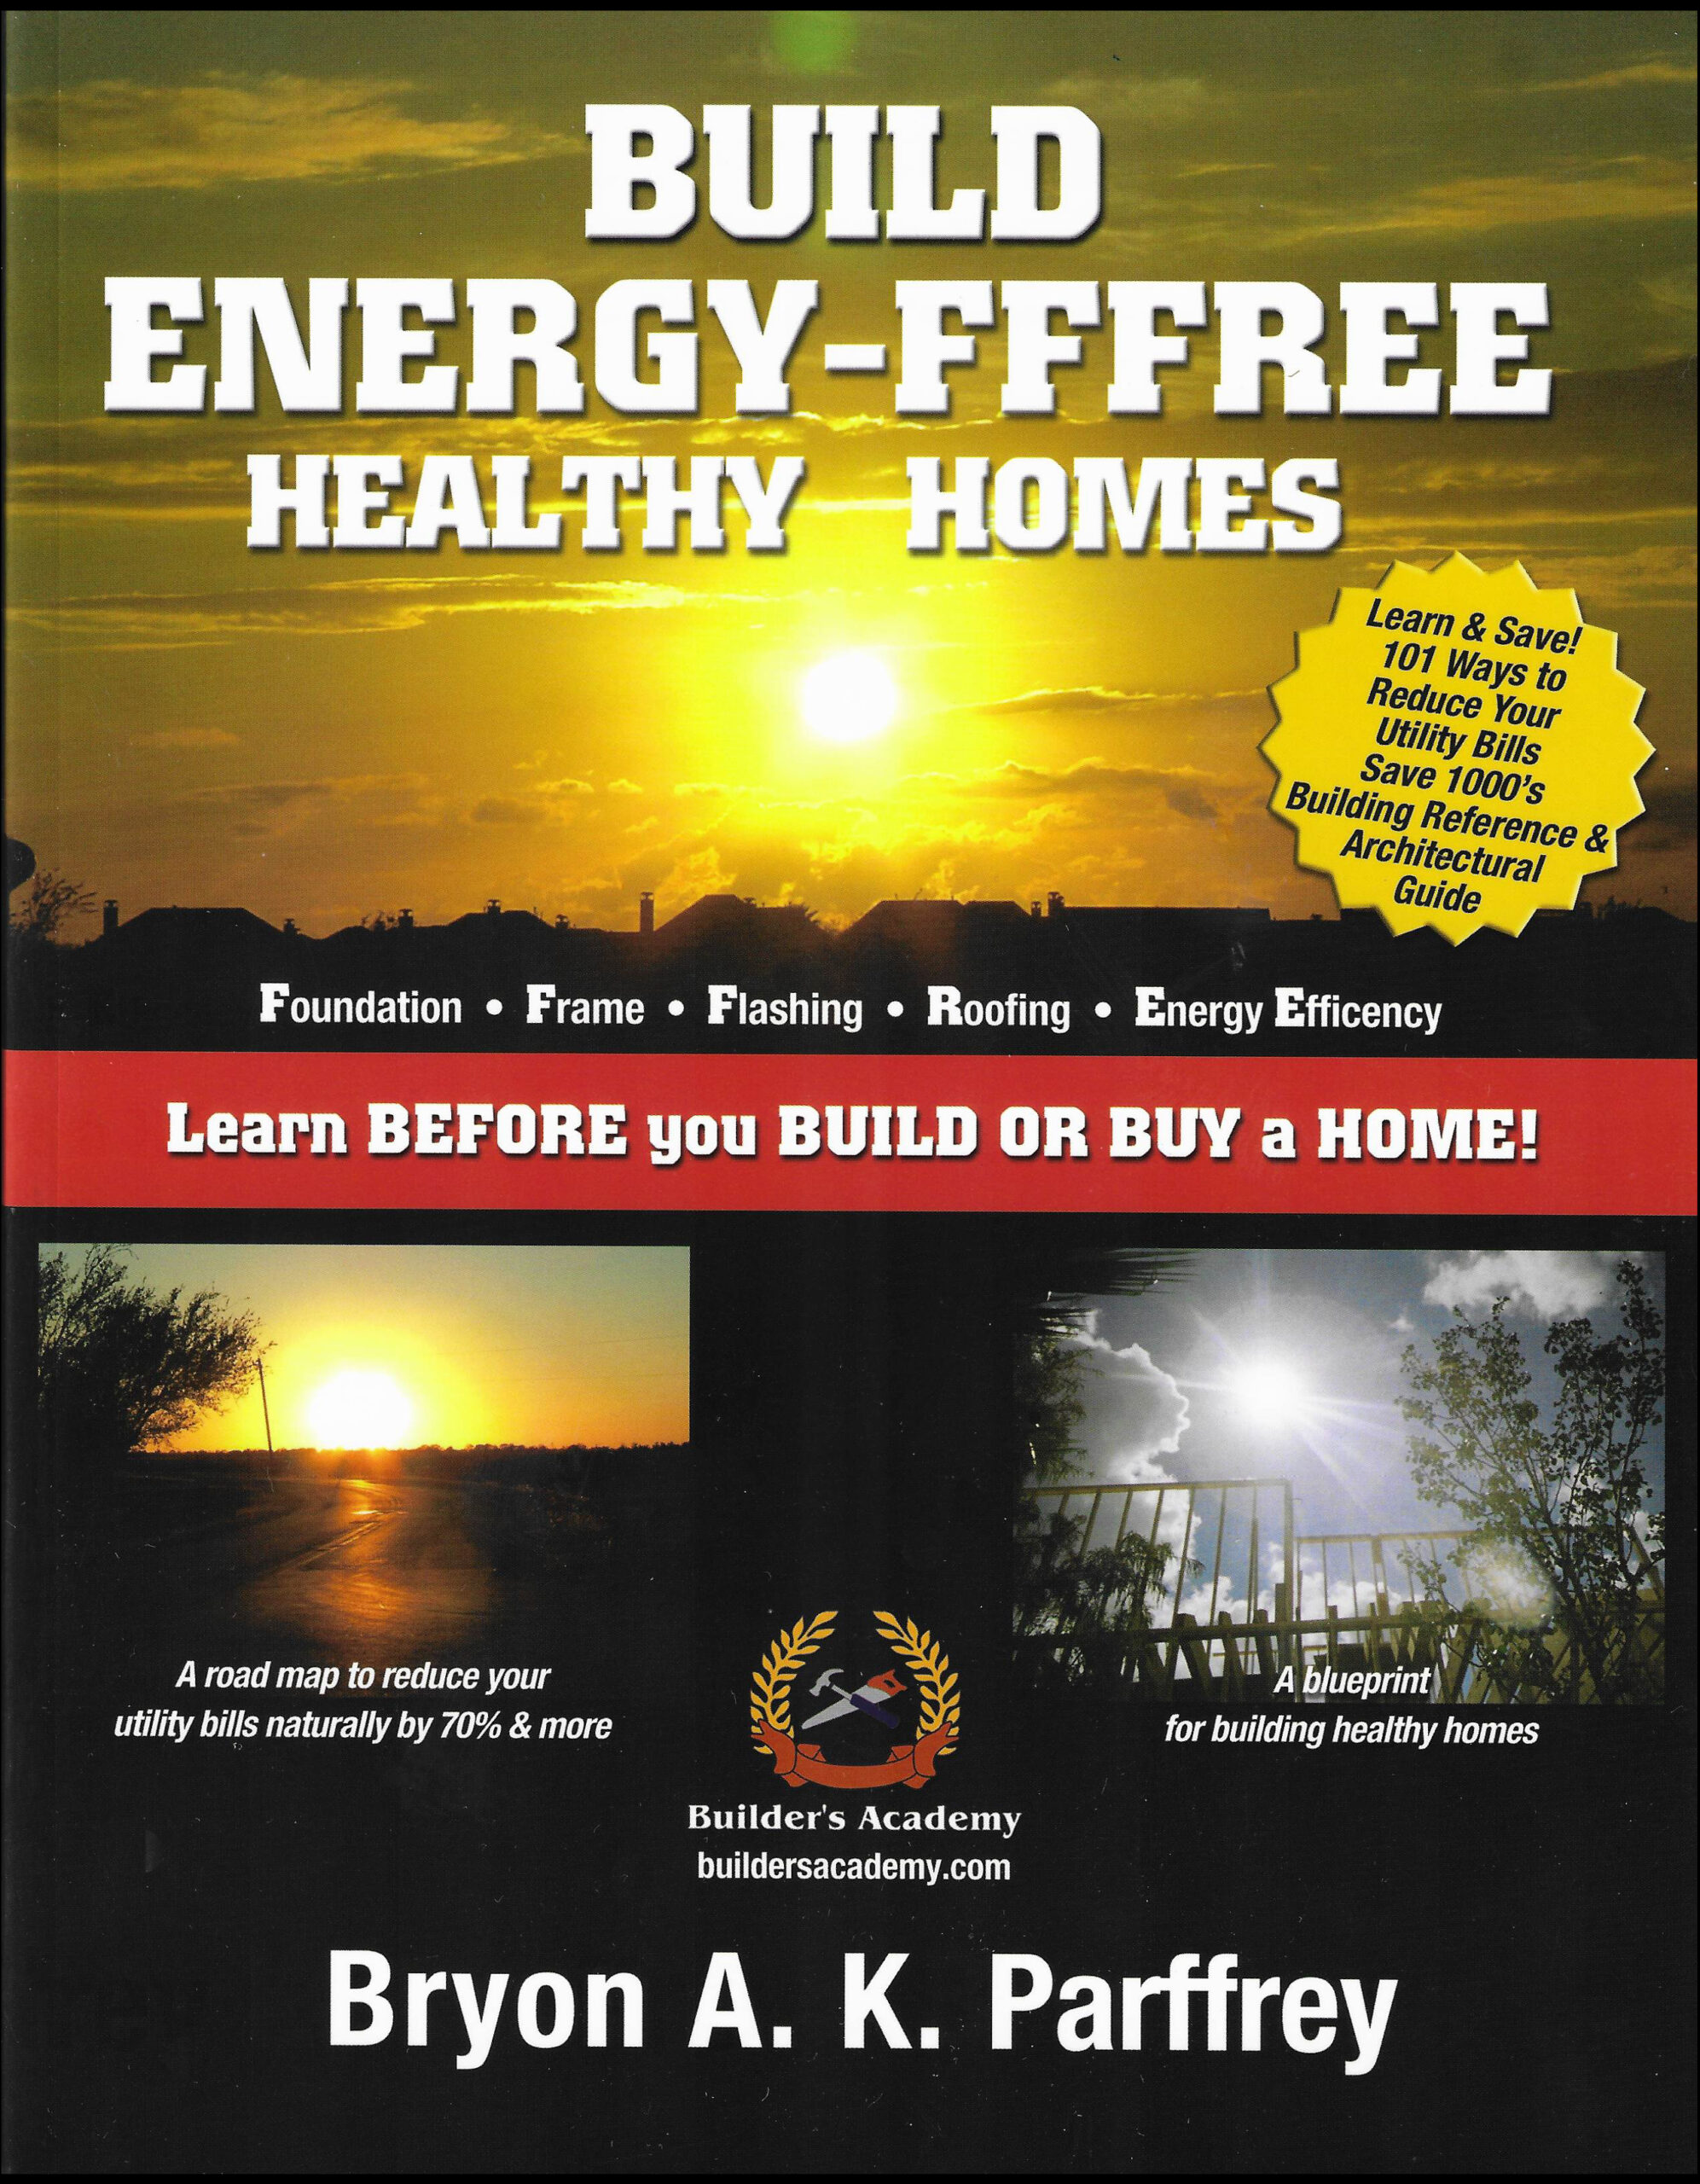 The front cover of the energy fffree book